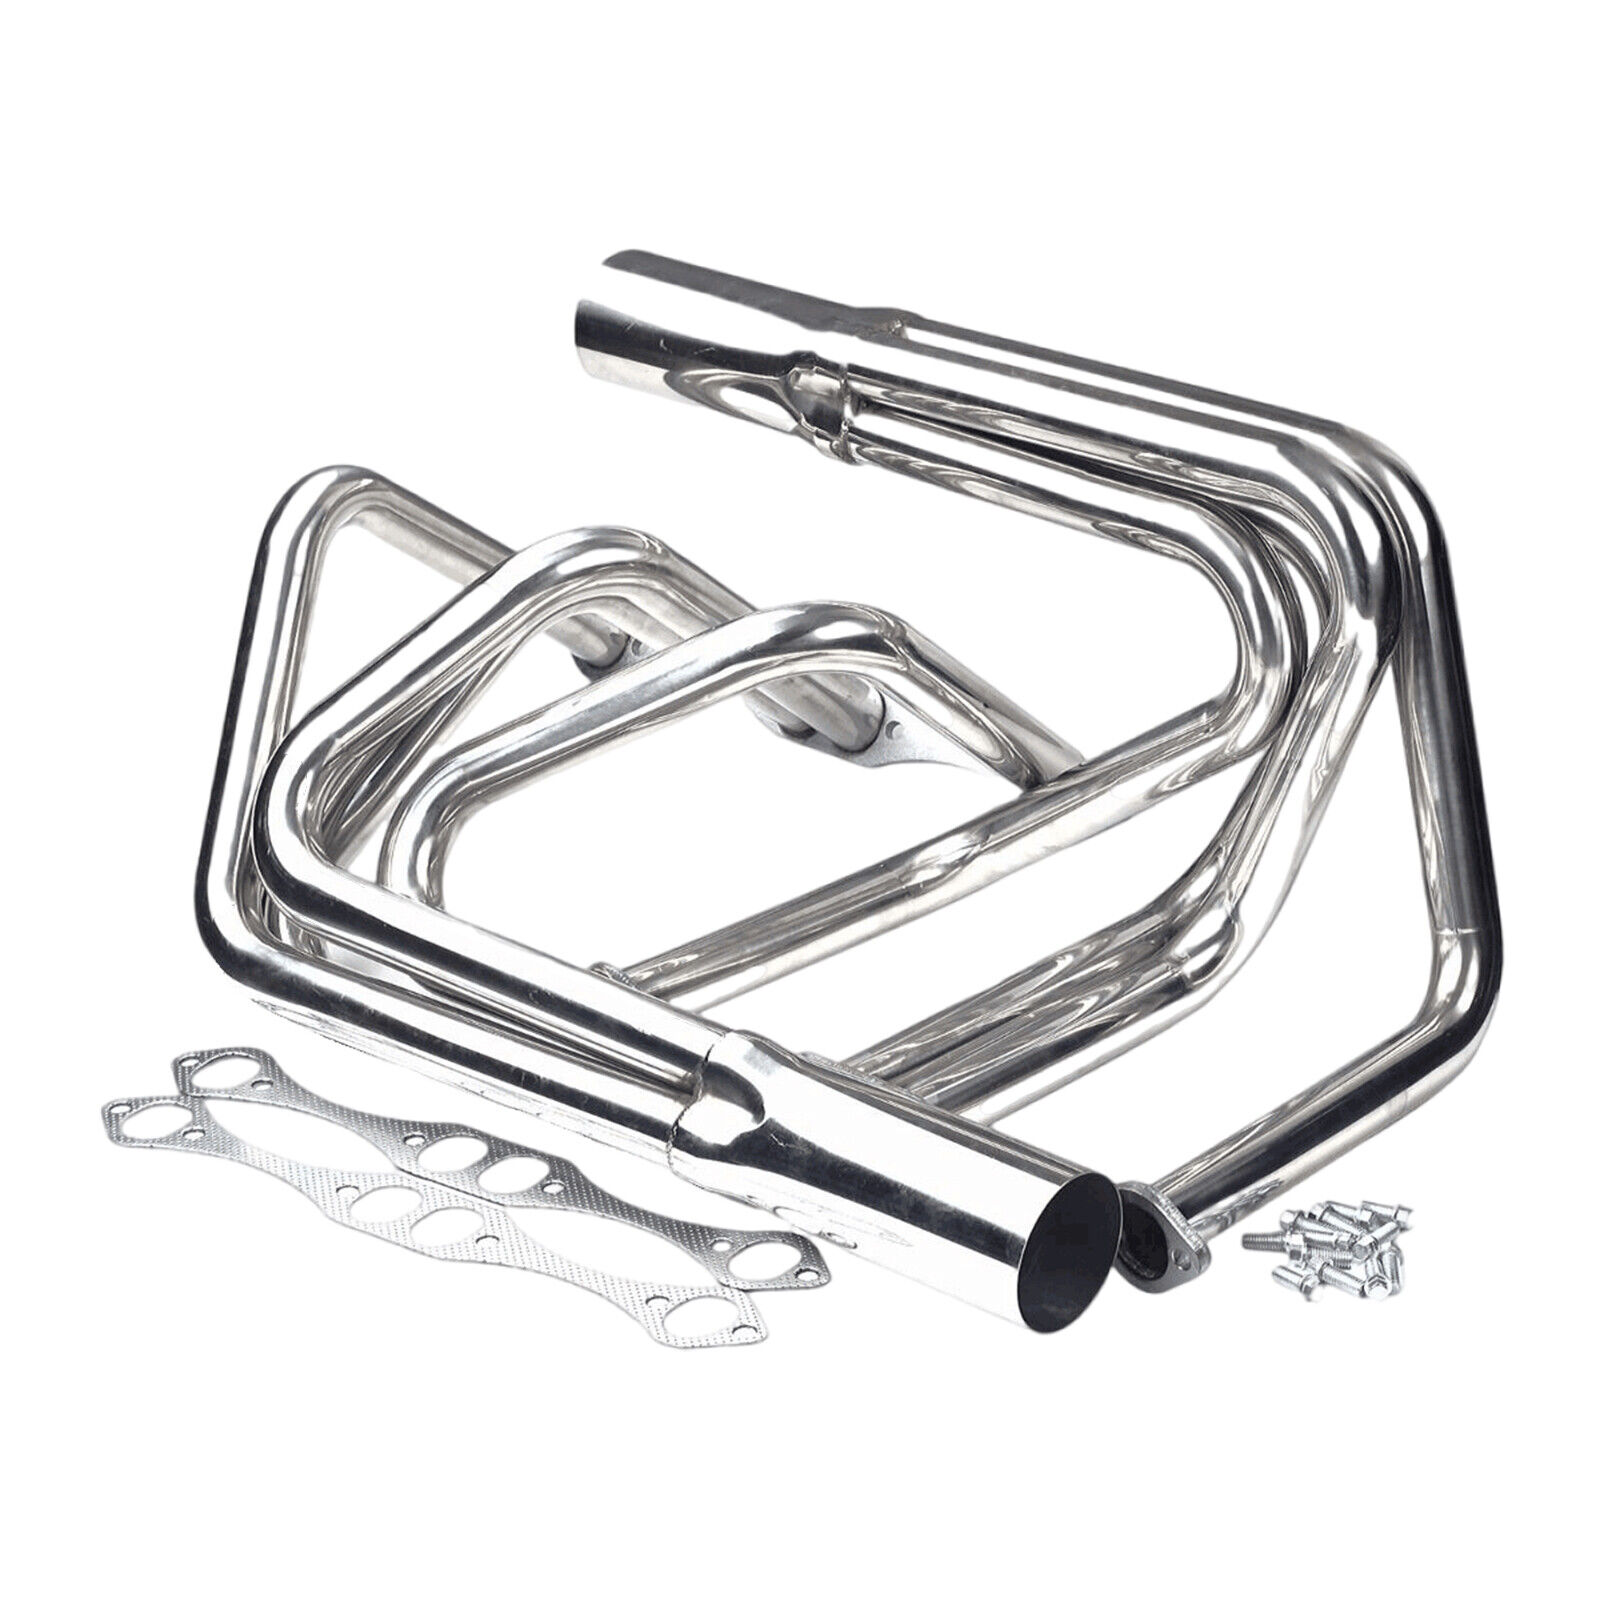 Stainless T-Bucket Sprint Roadster Headers Fit Small Block Chevy SBC 265-400 V8